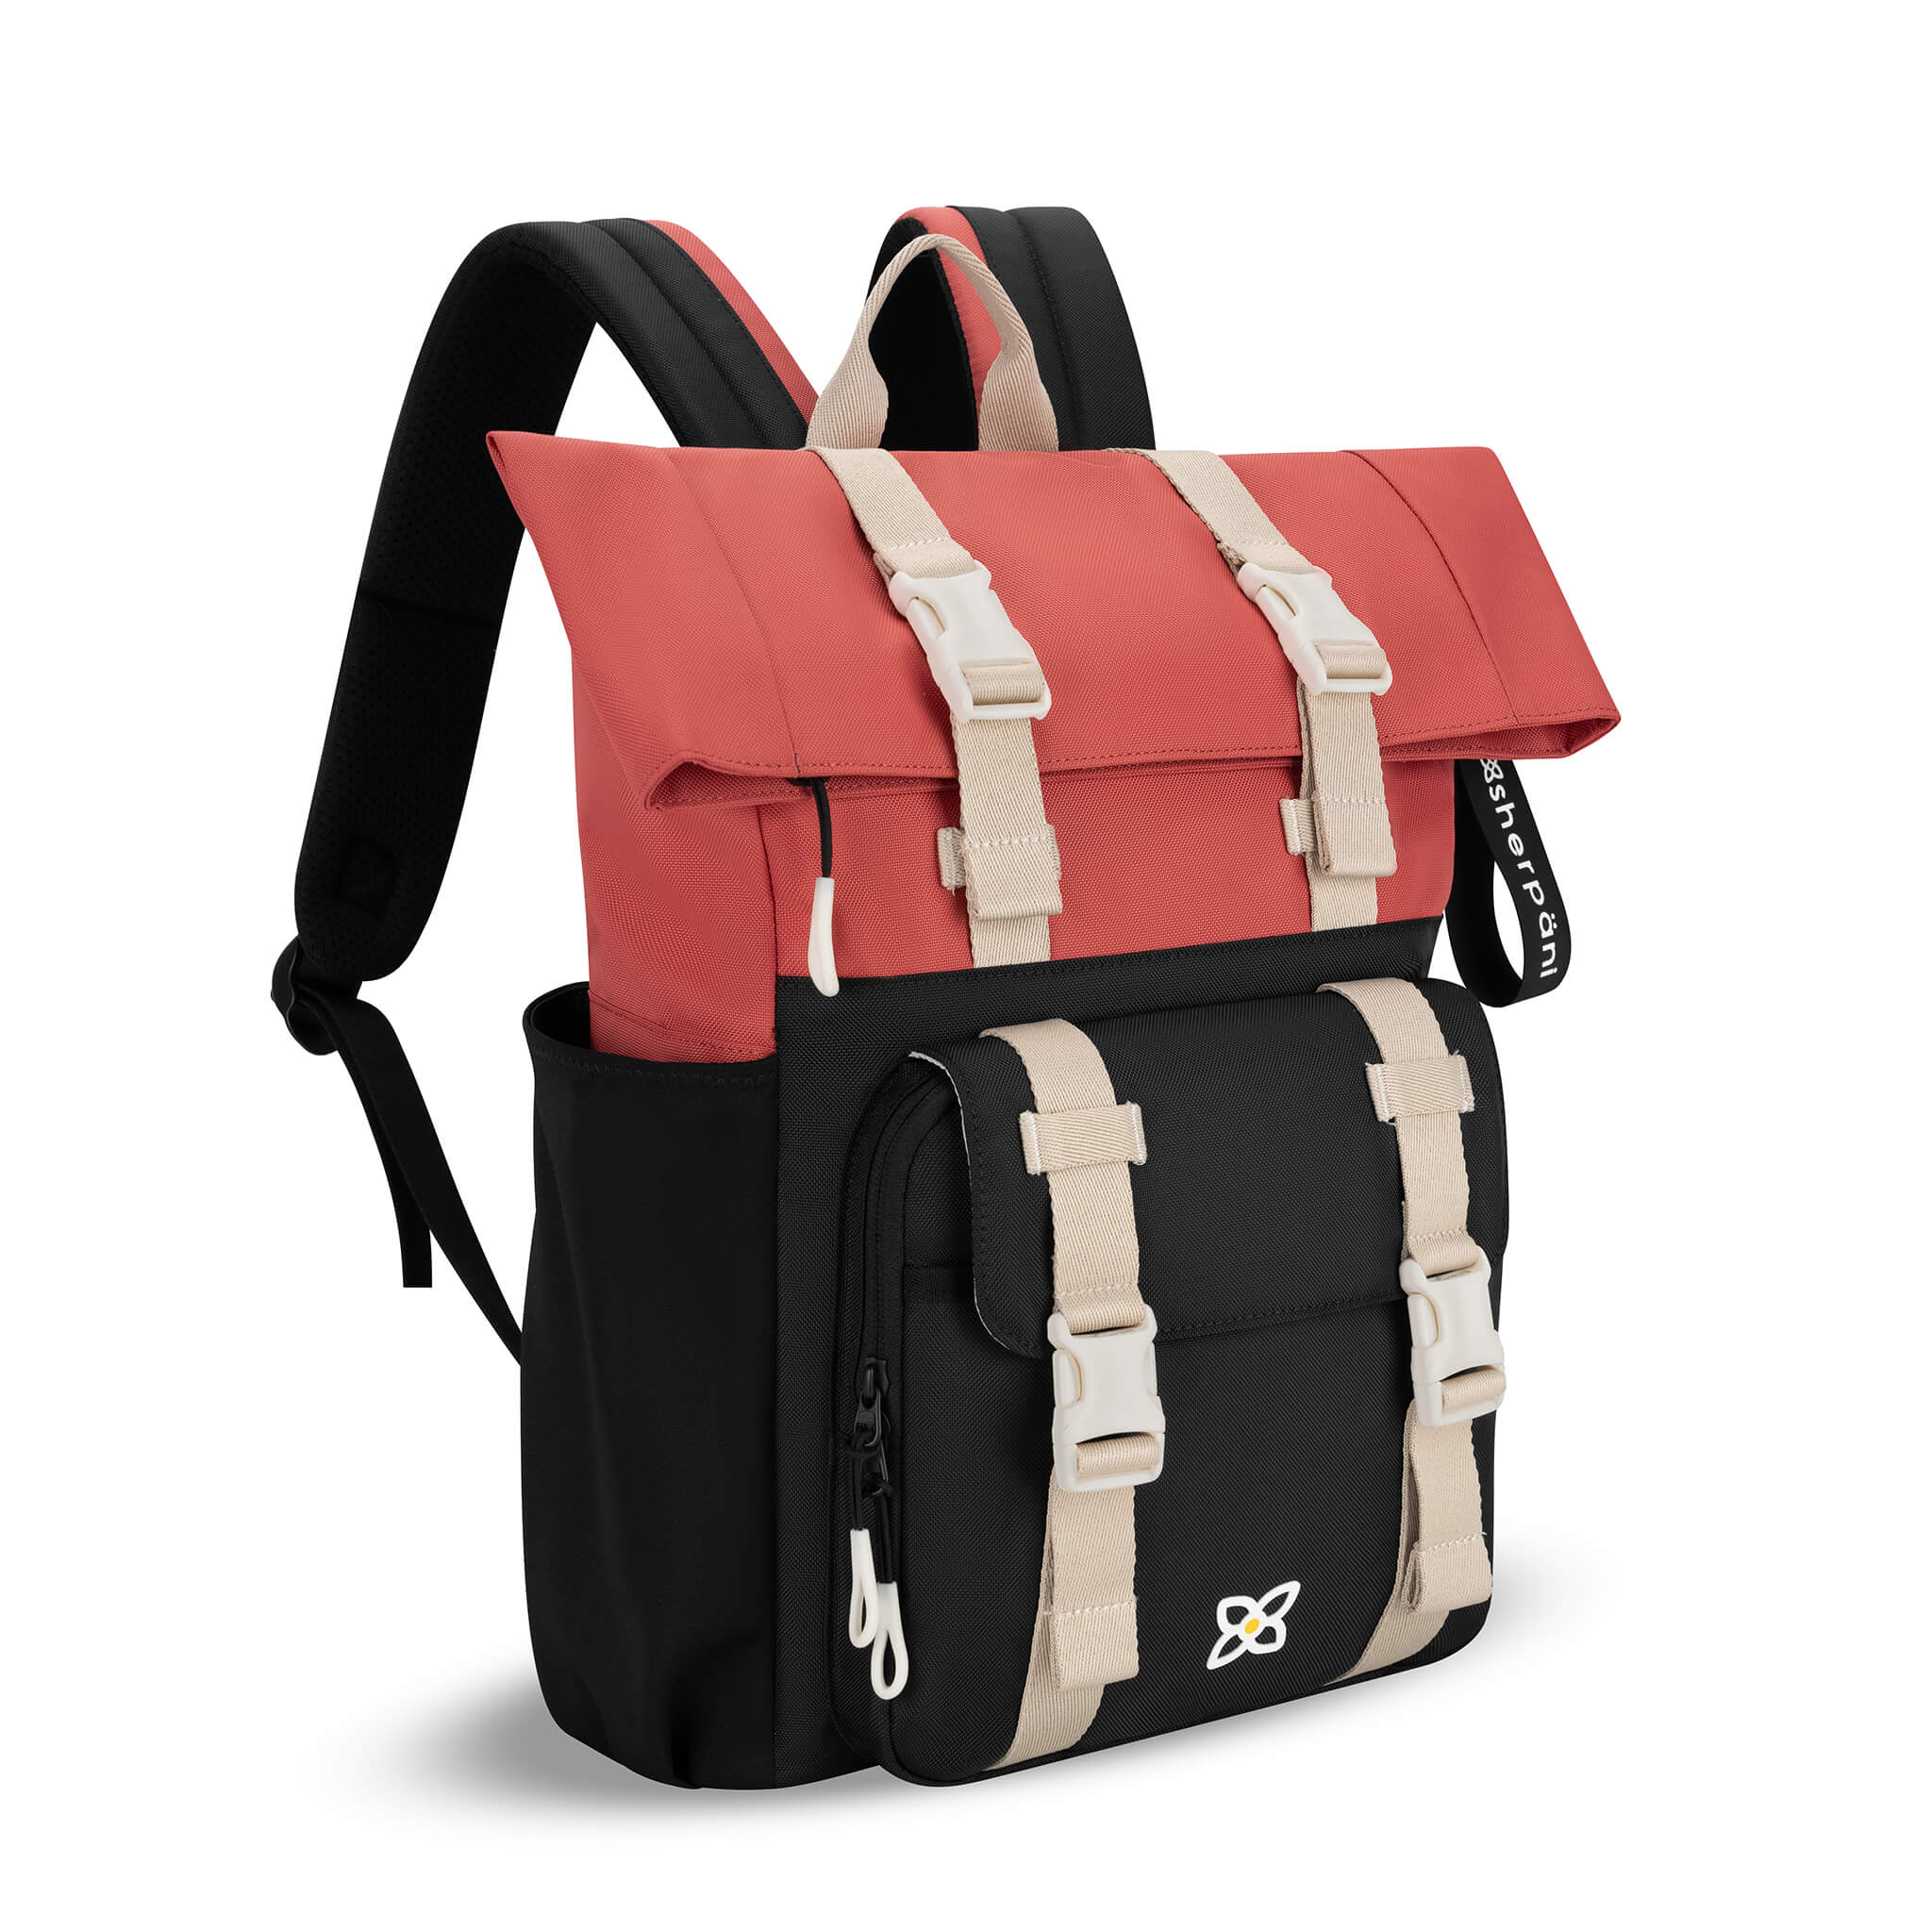 Angled front view of the Sedona in Reef. The compact backpack features ergonomic straps and a stylish buckle closure. 